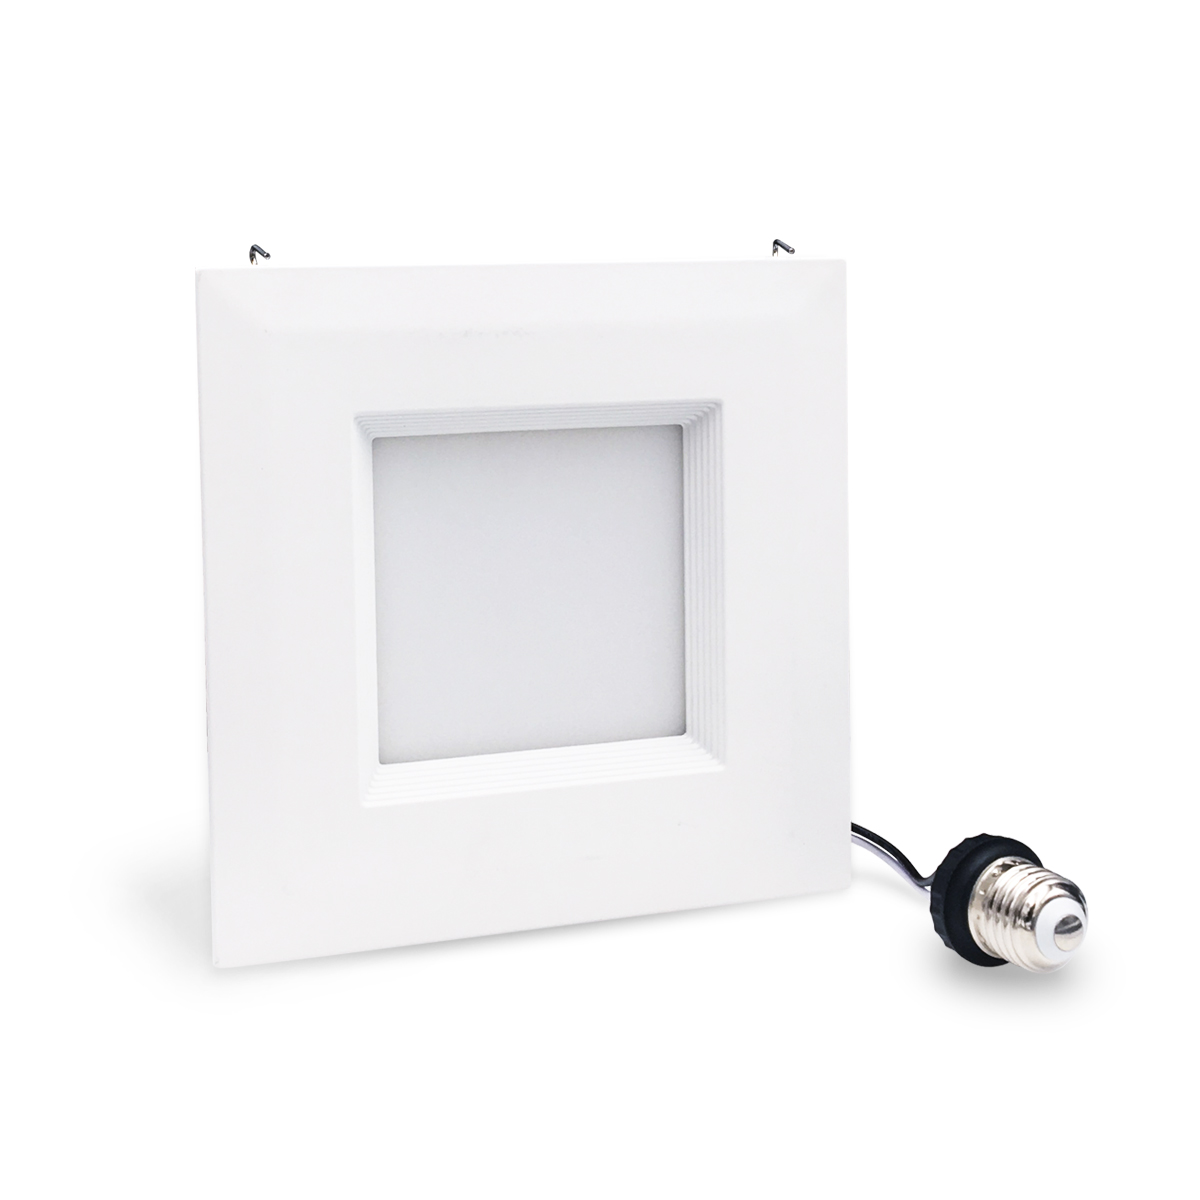 Homestar 6inch 12W Square Retrofit Downlight with ETL and ES Certification